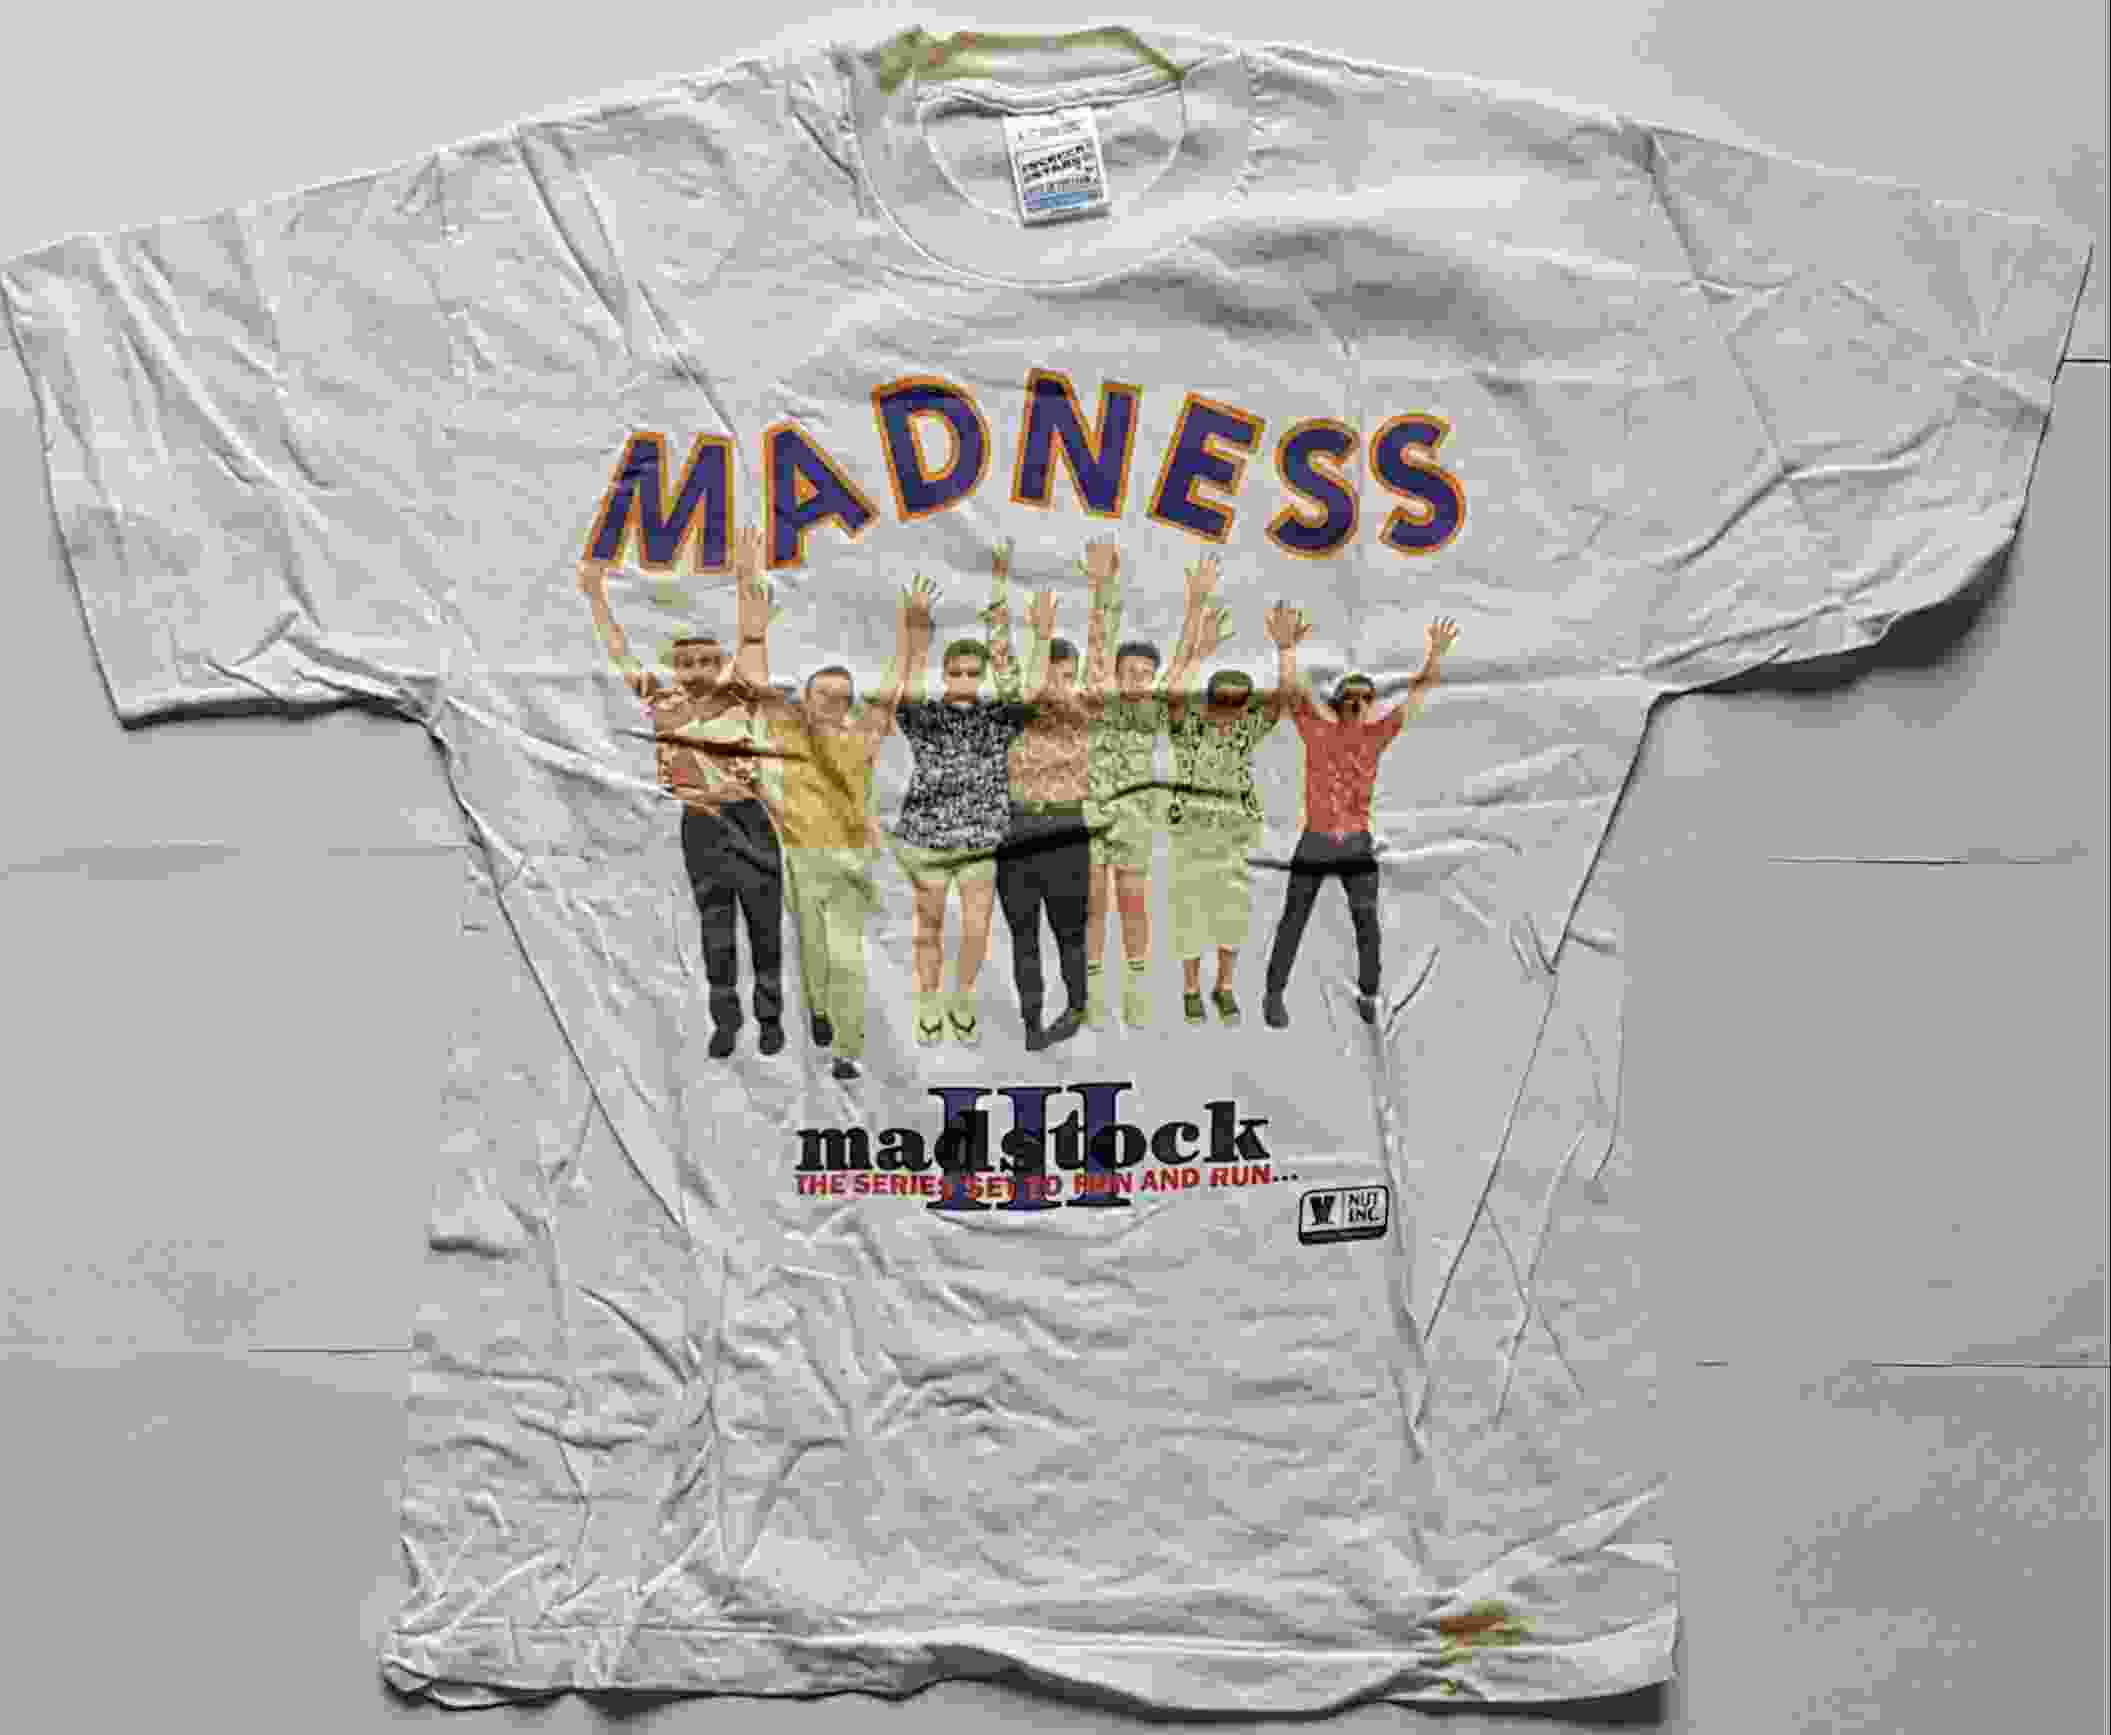 Picture of TS-MT3 Madstock III by artist Madness